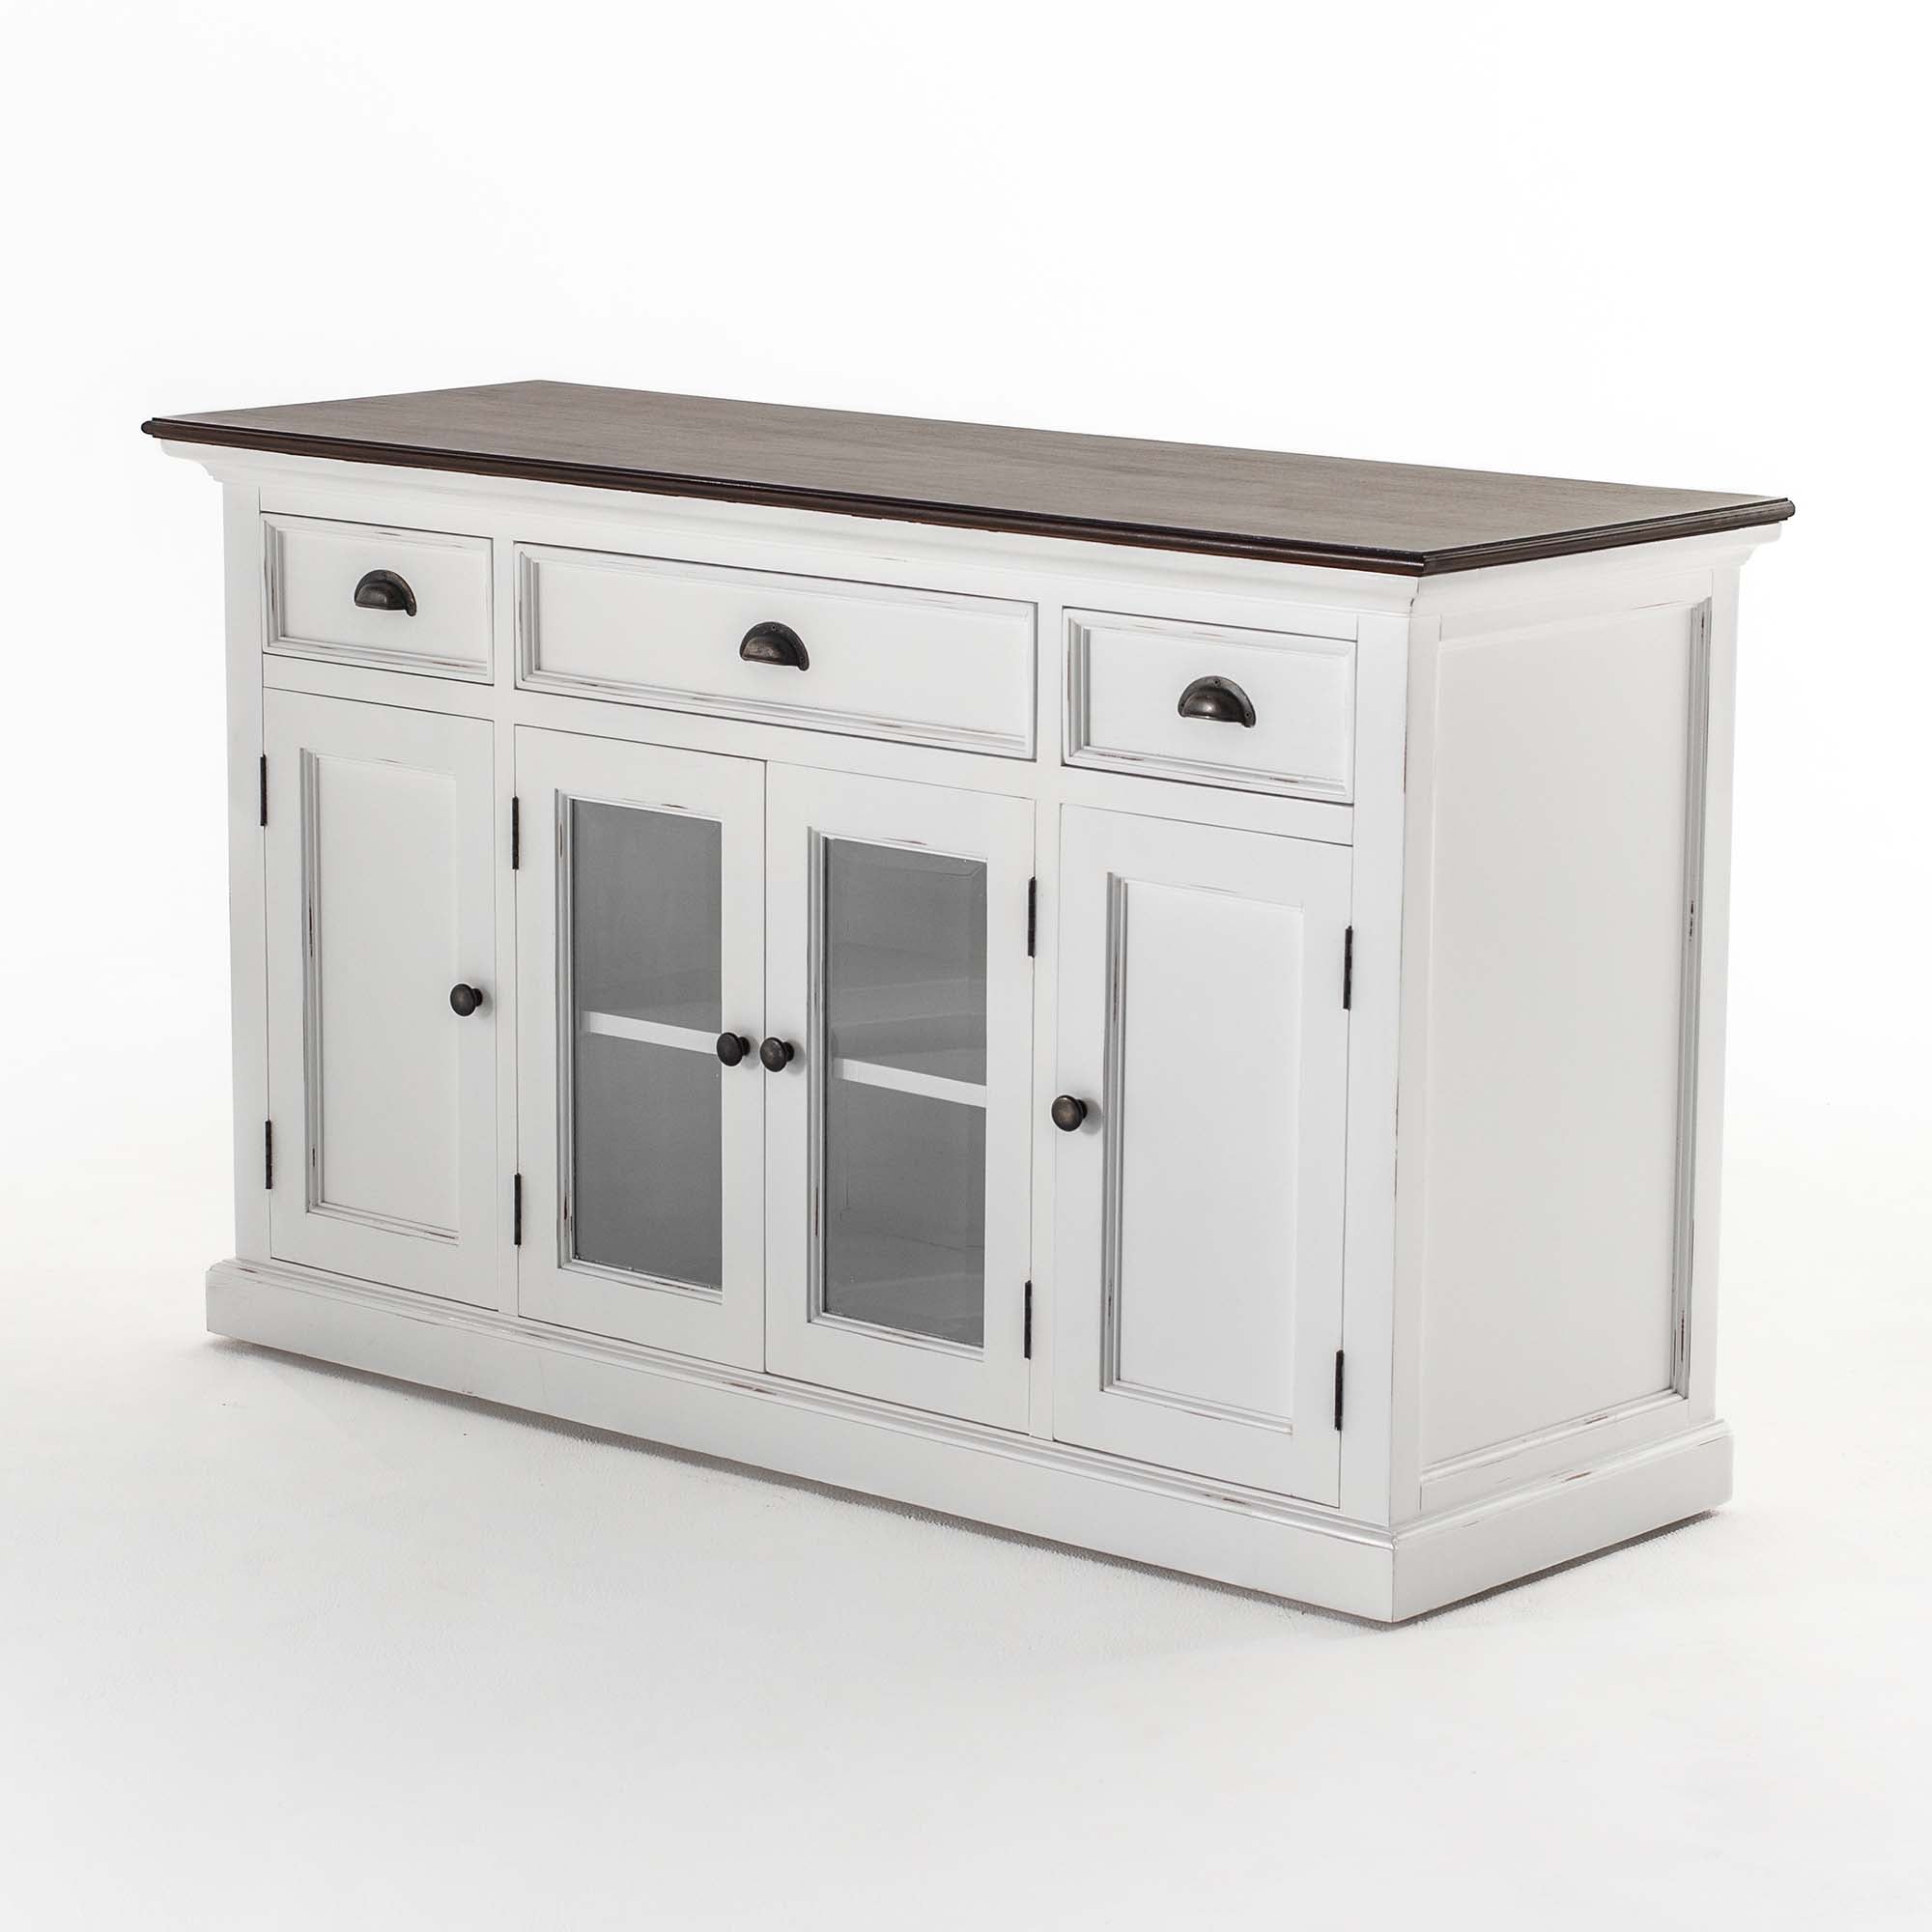 Halifax accent sideboard with 4 doors and 3 drawers